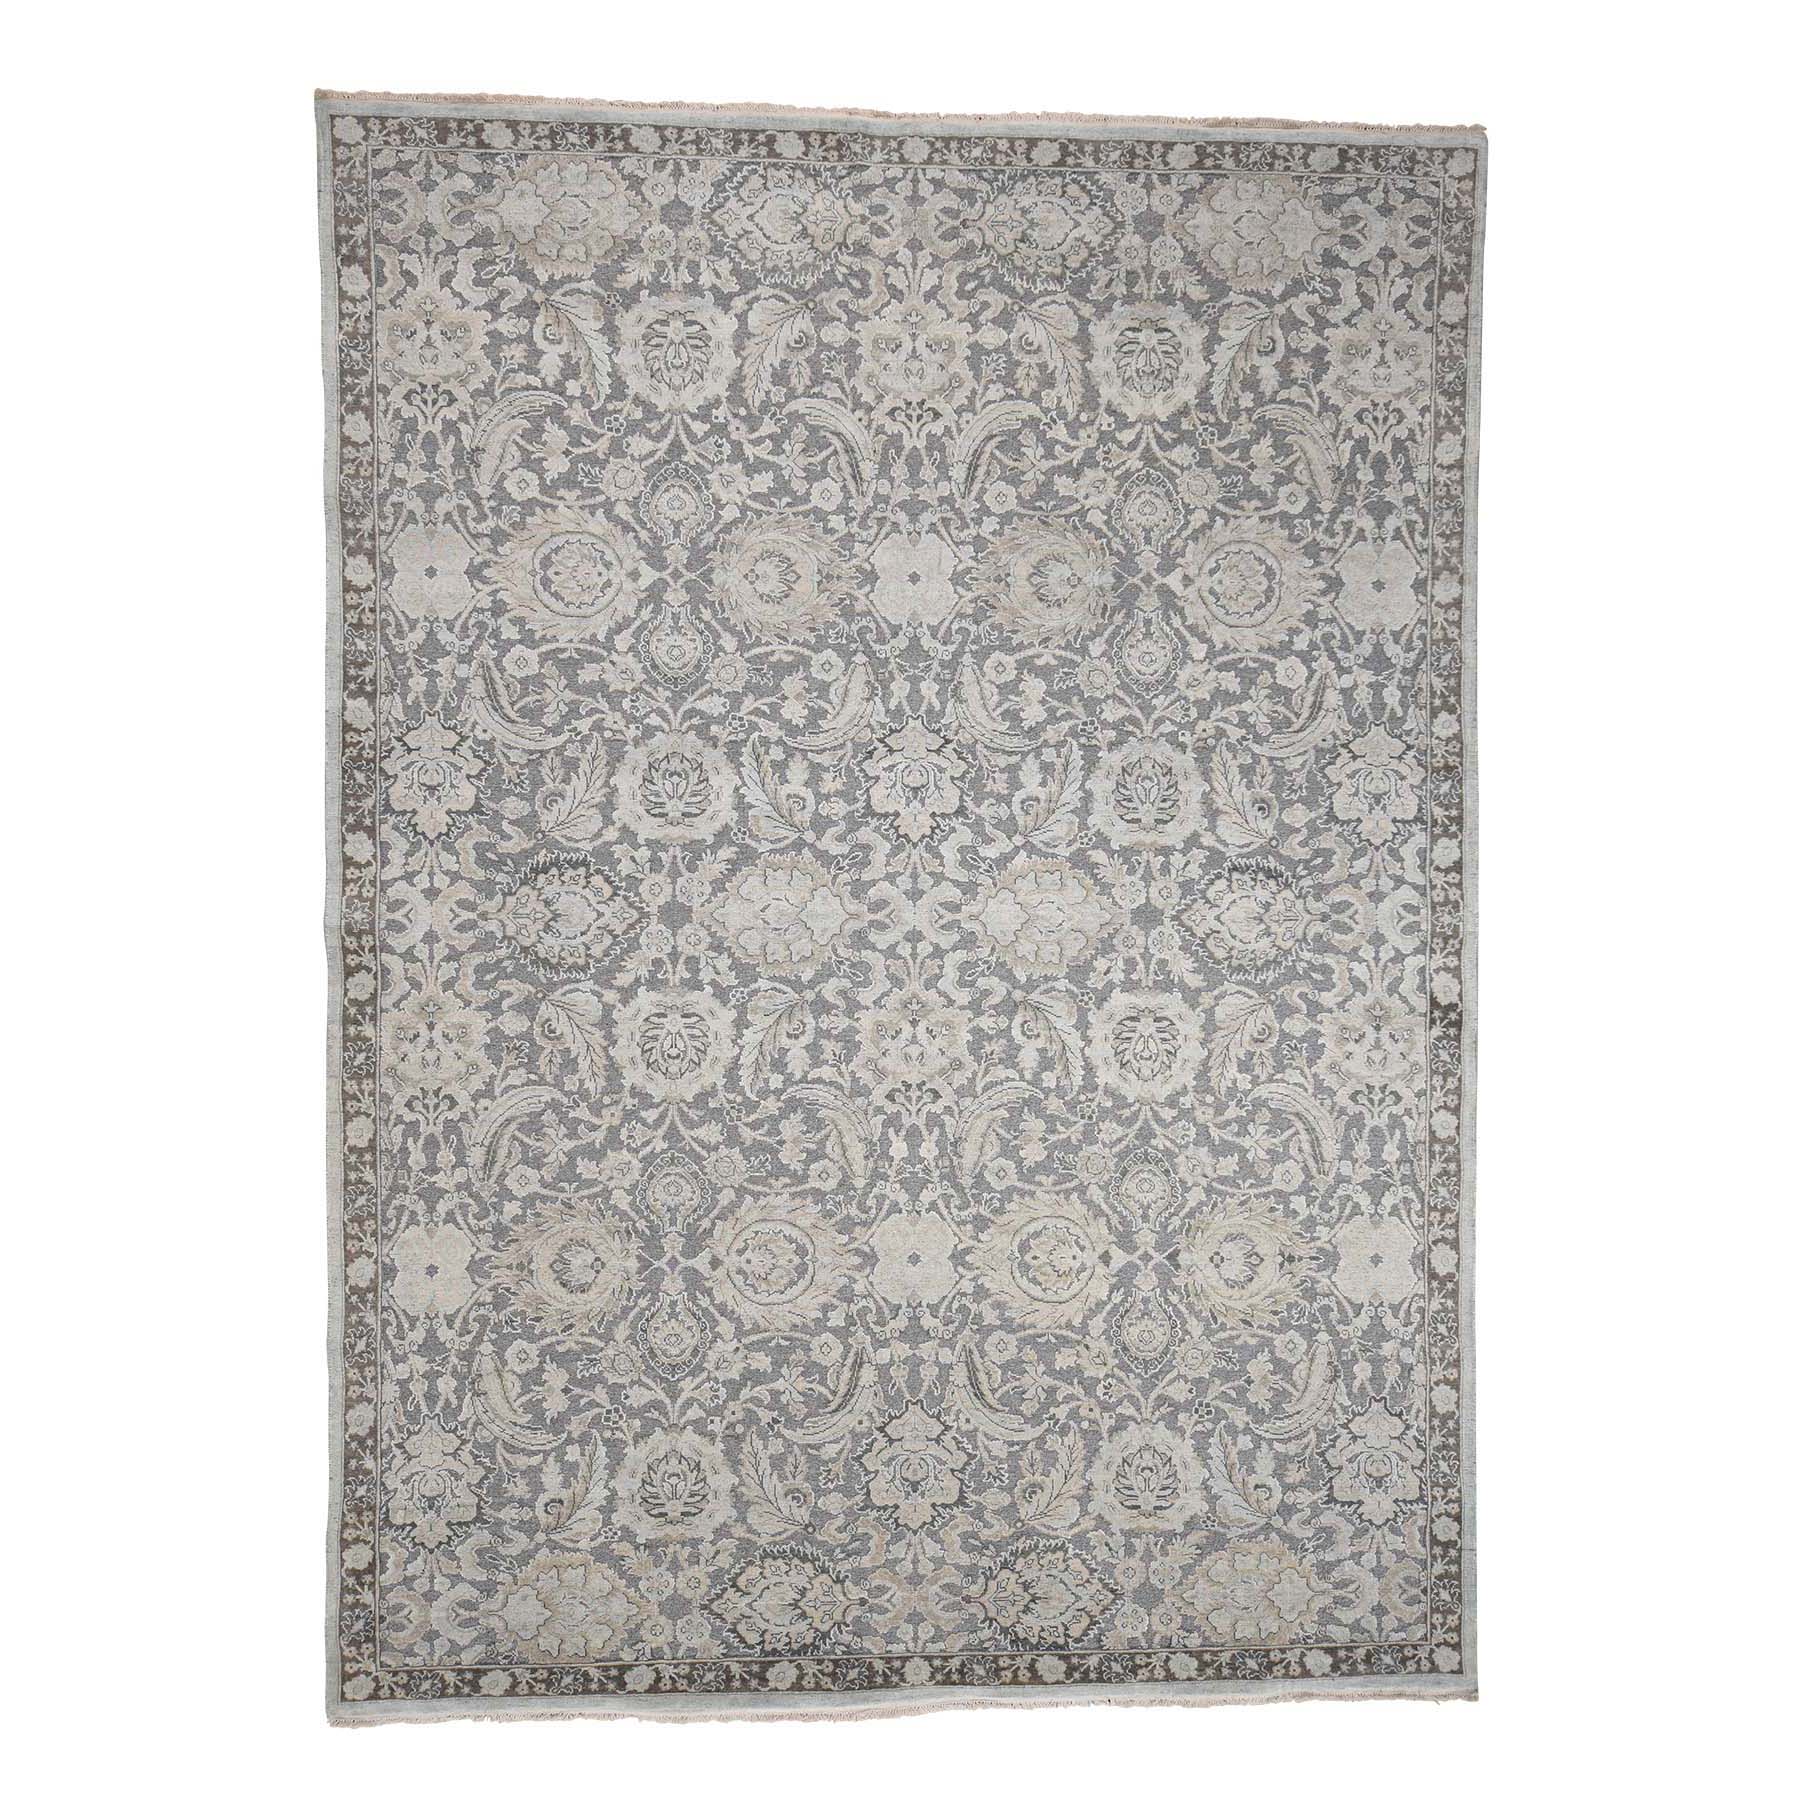 9'1"x12'5" Hand Woven Flat Weave with Raised Silk Oriental Rug 